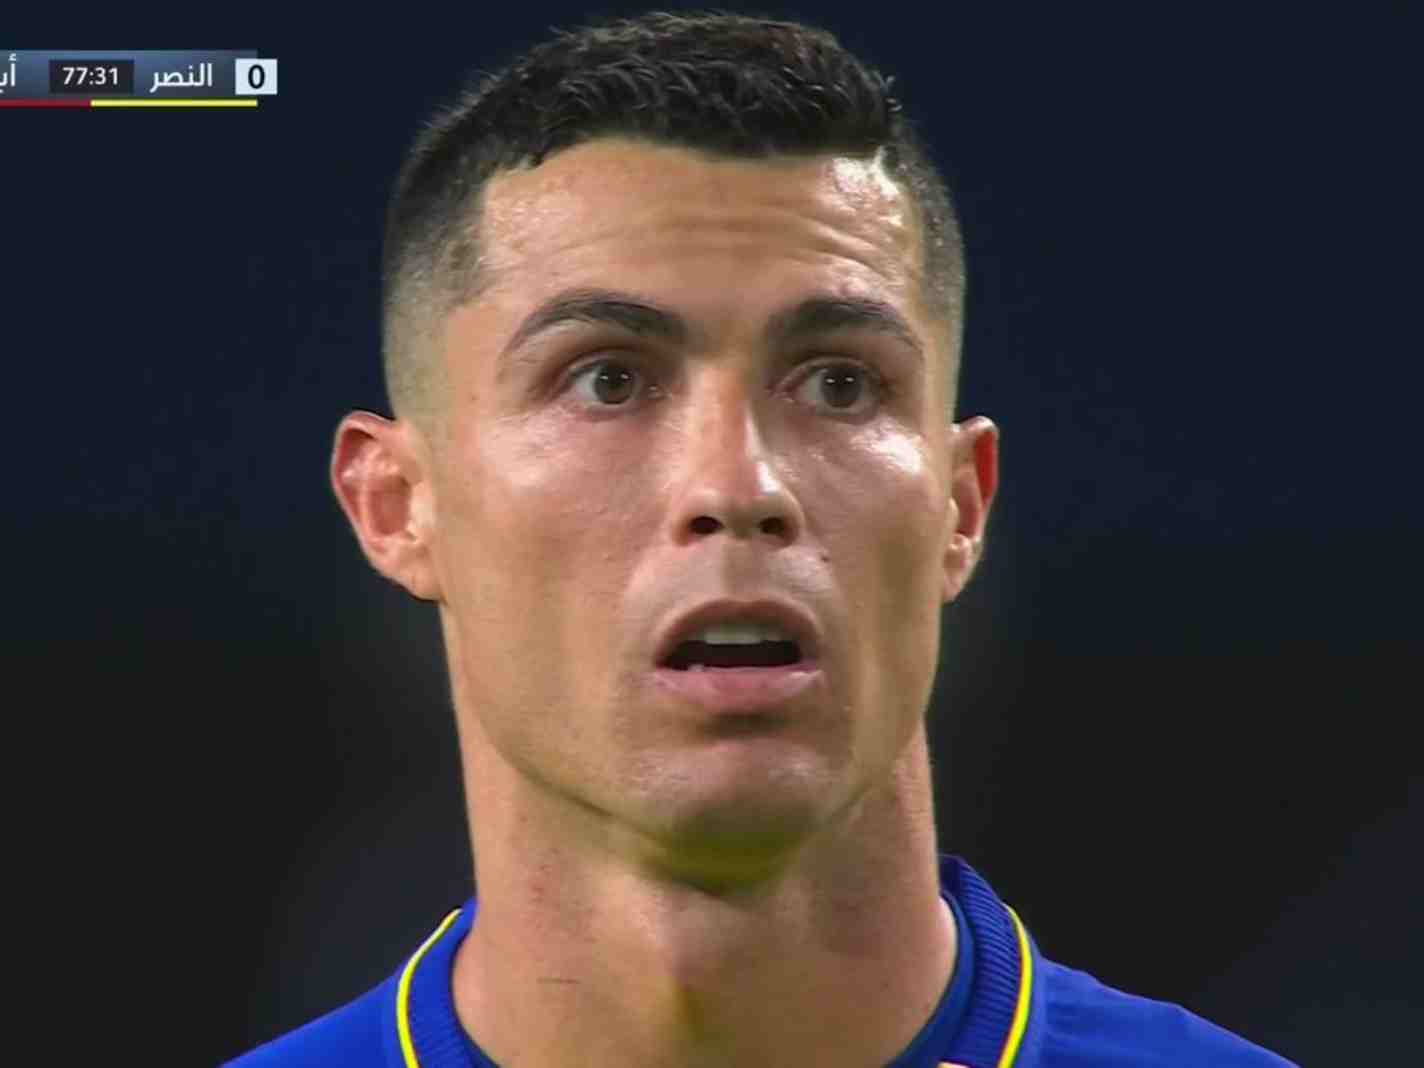 Look: Cristiano Ronaldo Reveals Darker Side by Lashing out at Cameraman